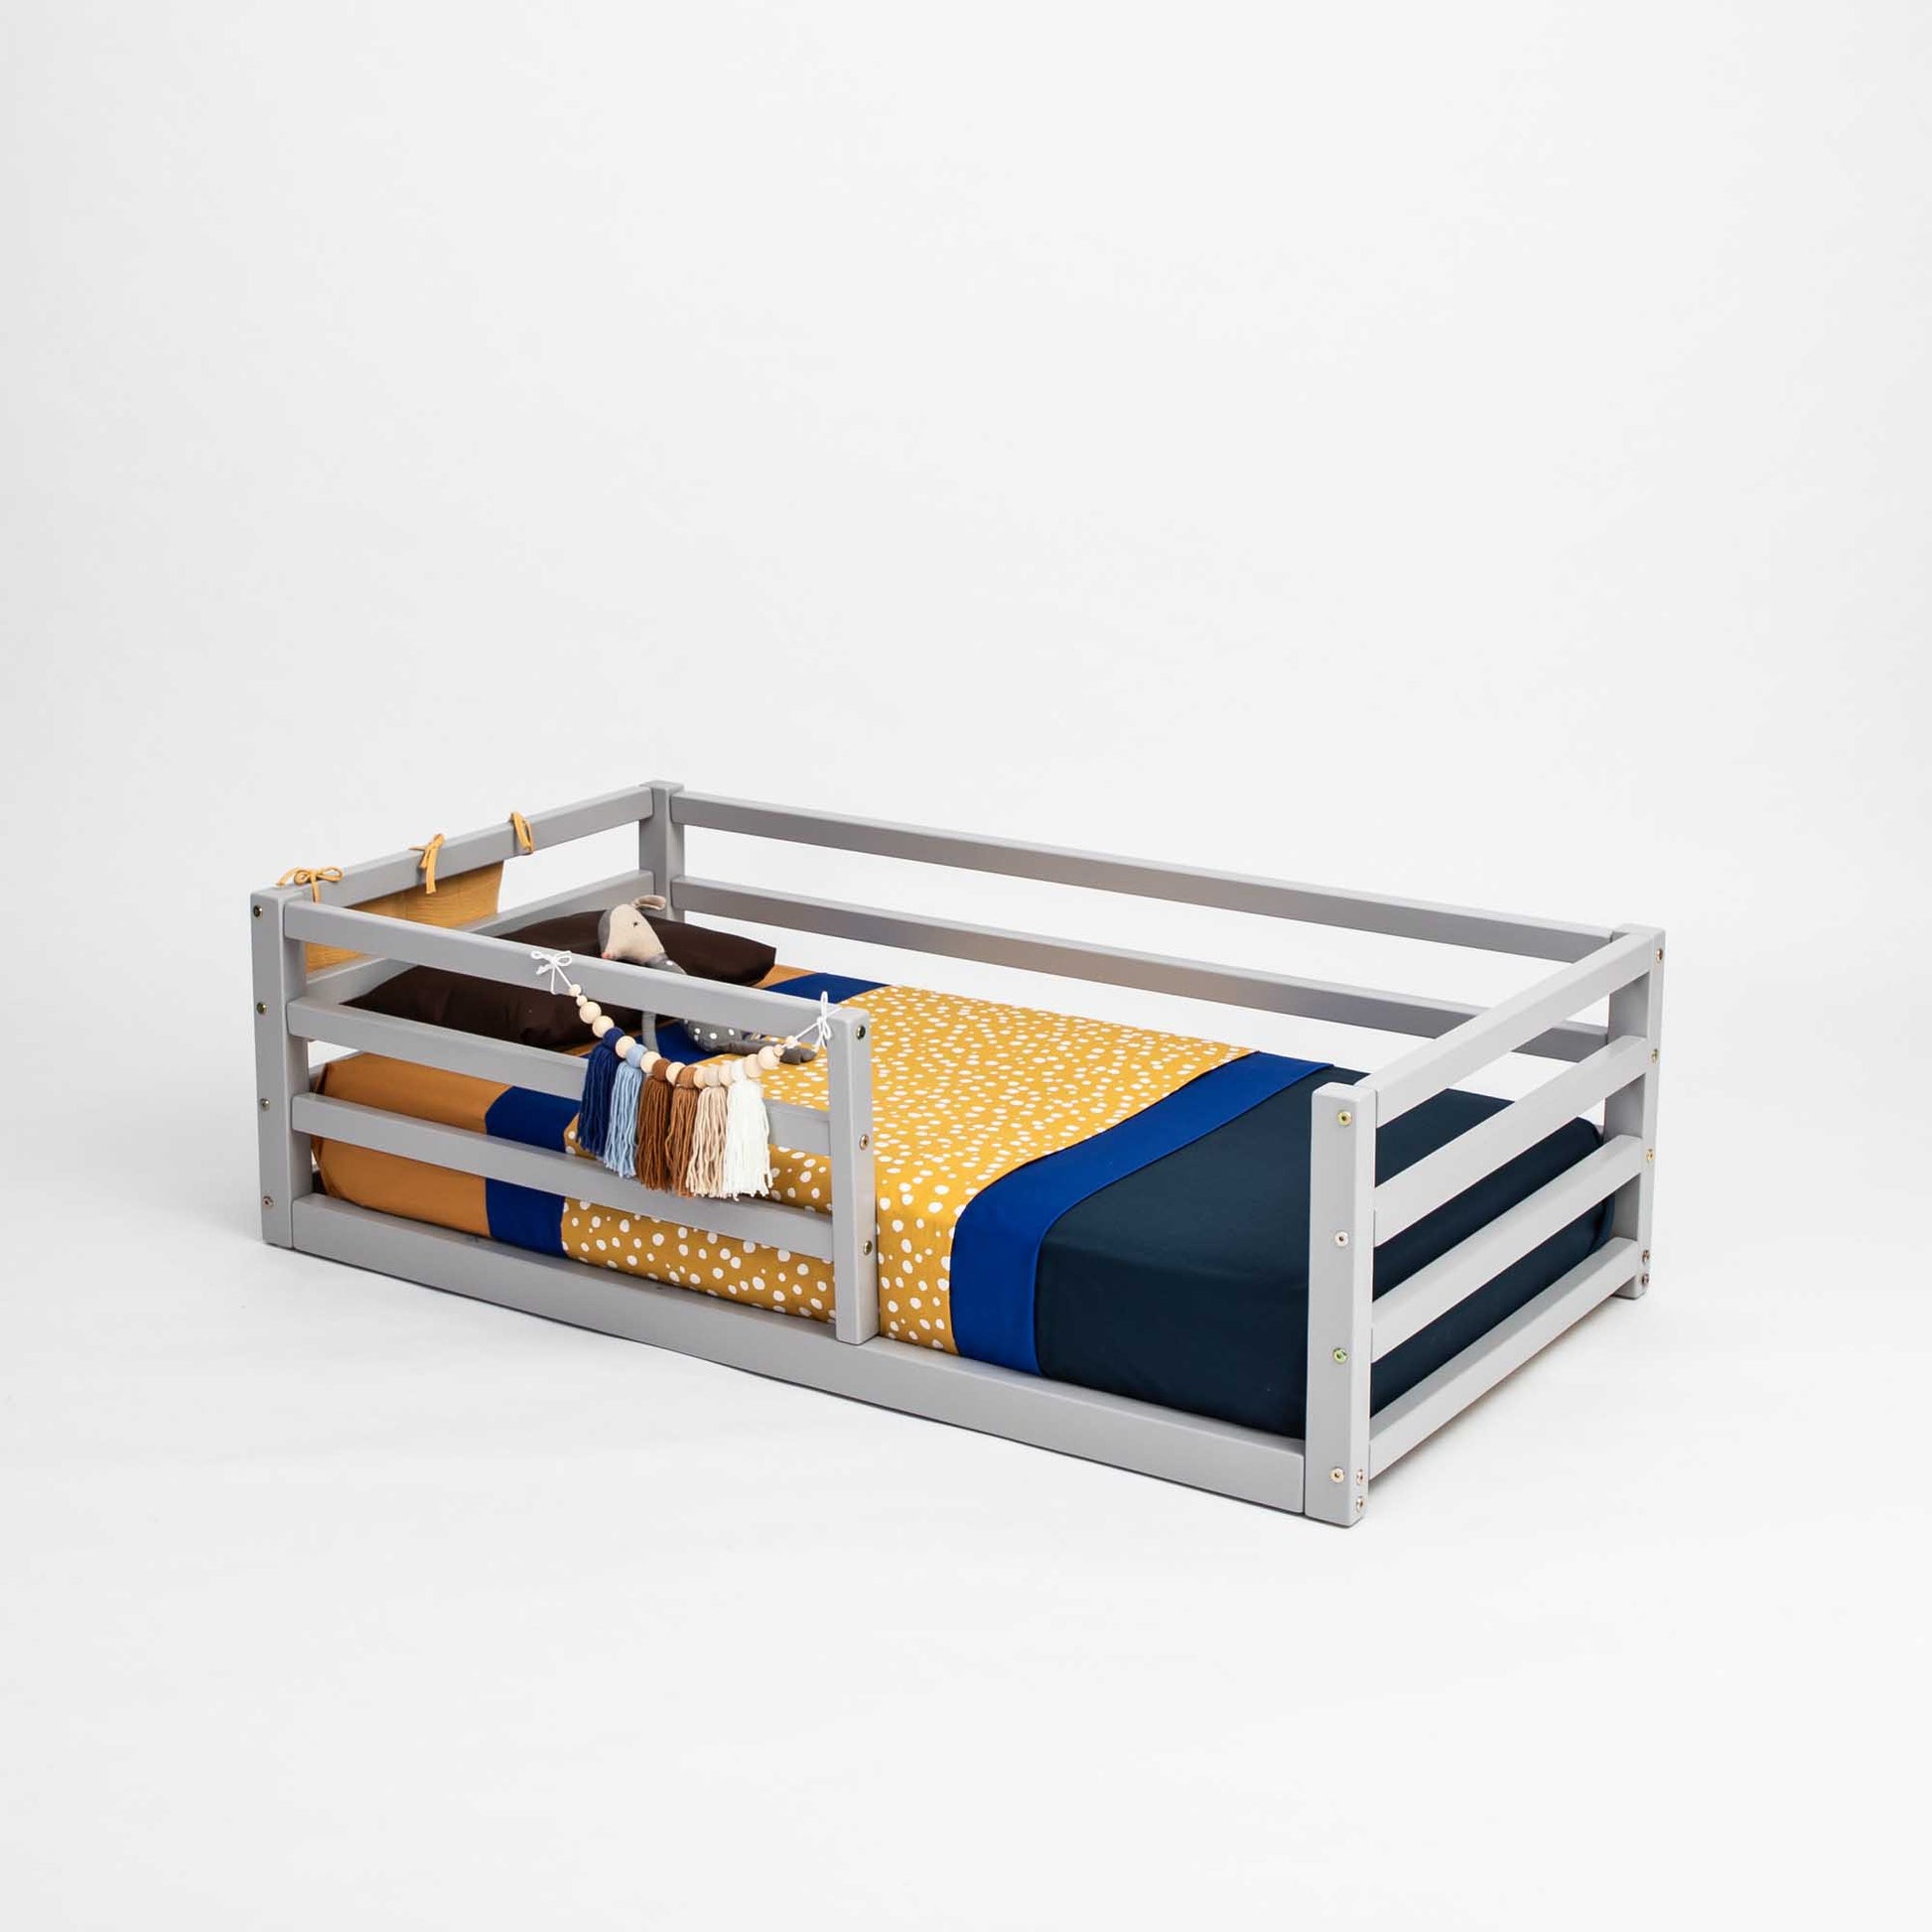 An independent sleeping space for toddlers, the Sweet Home From Wood floor-level kids' bed with a horizontal rail fence features a cozy yellow and blue blanket. It serves as a perfect transitional piece for little ones.